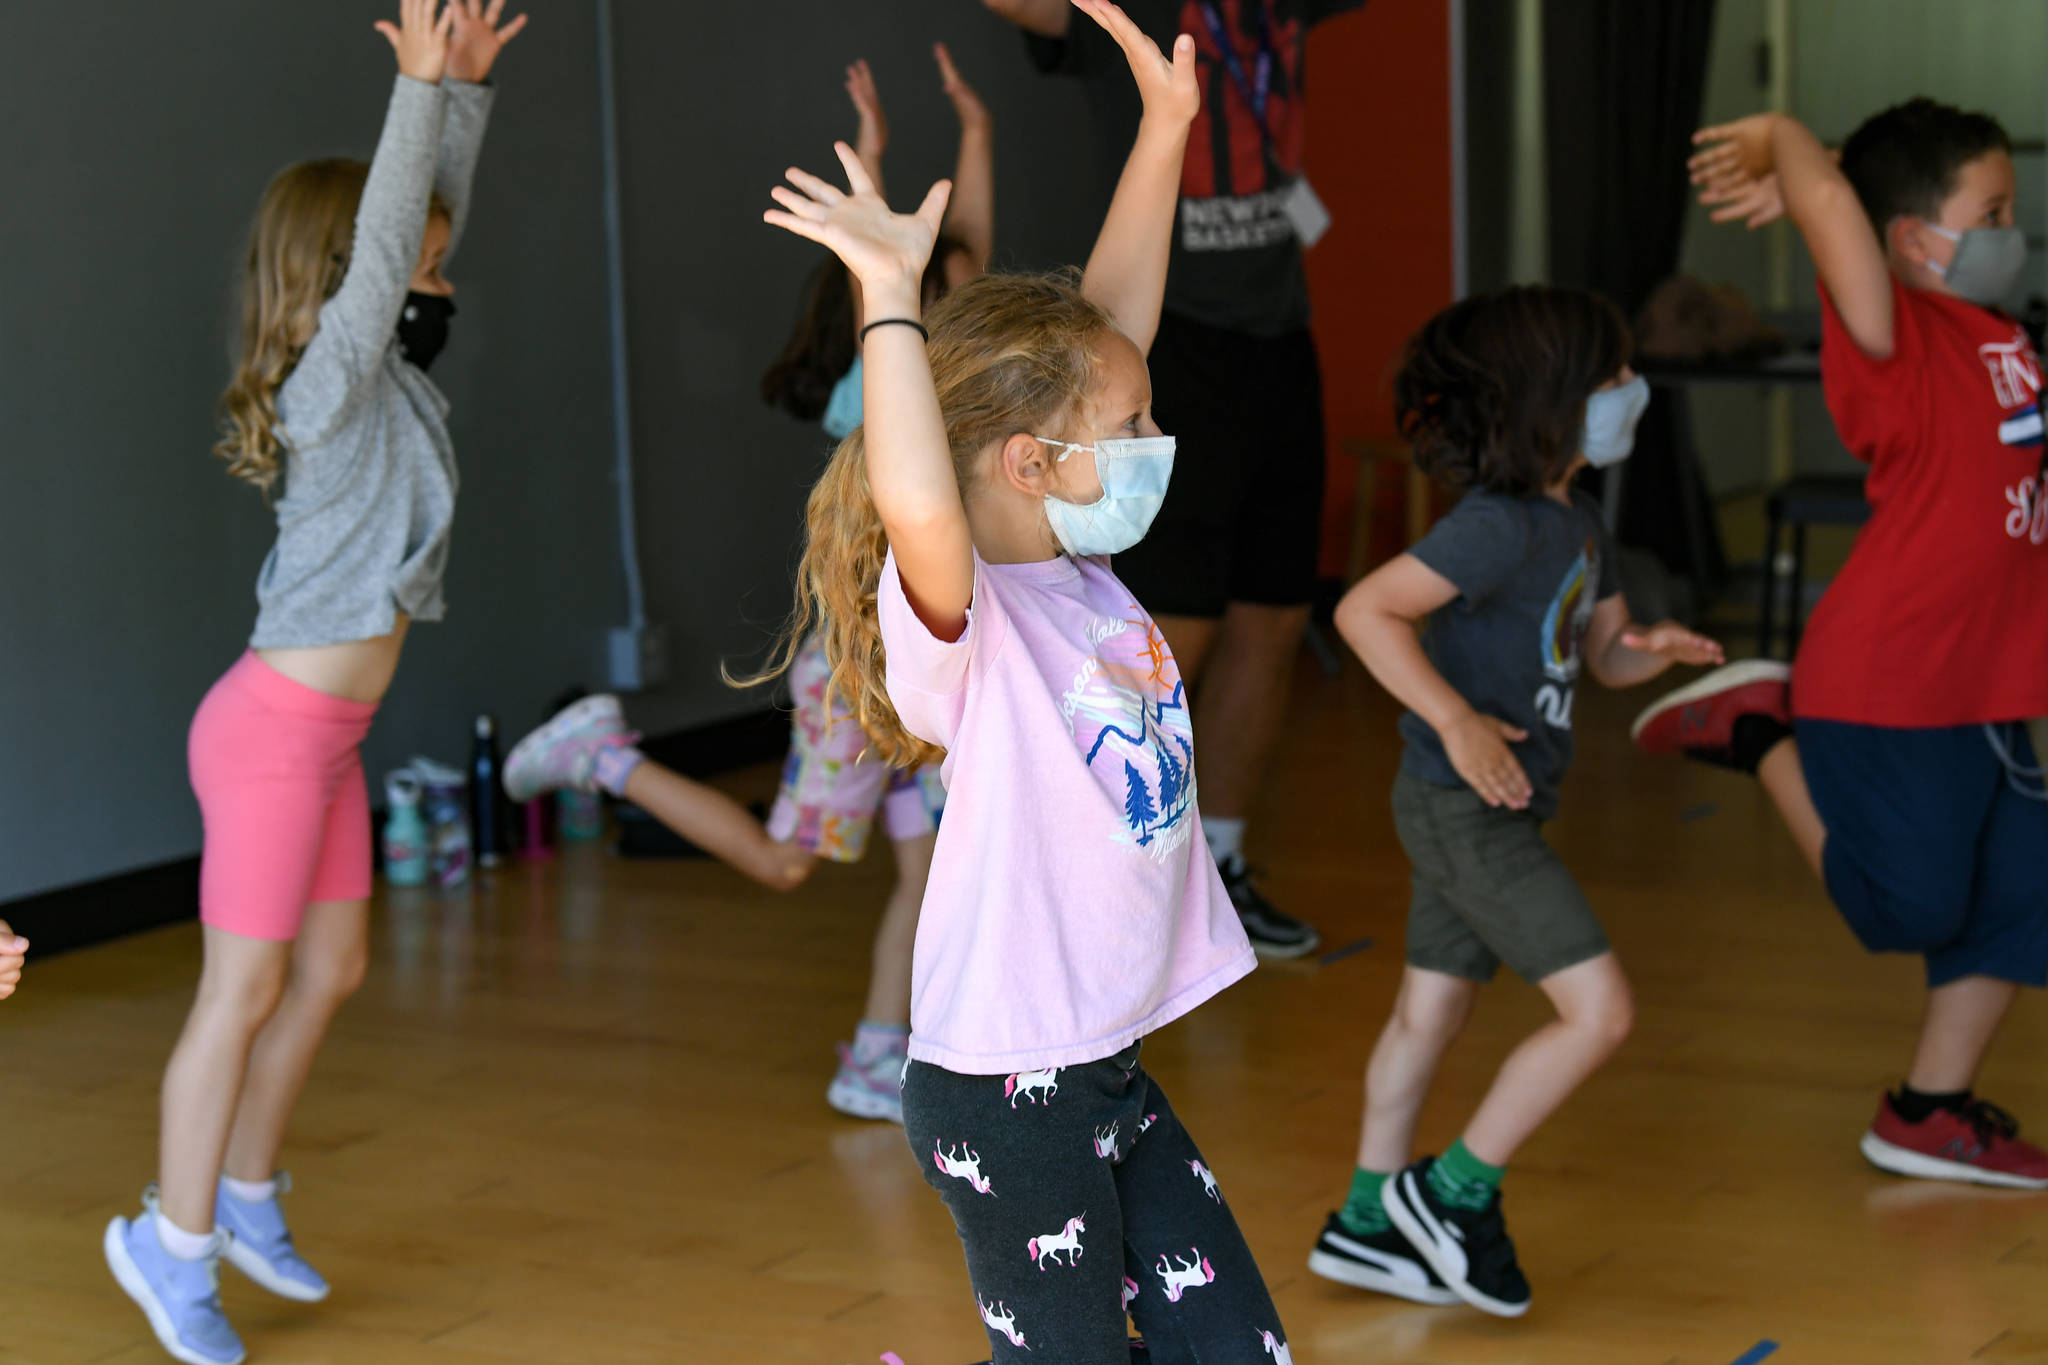 Campers dance away the day at the Stroum Jewish Community Center J-Cation camp. Photo courtesy of John Shaffer